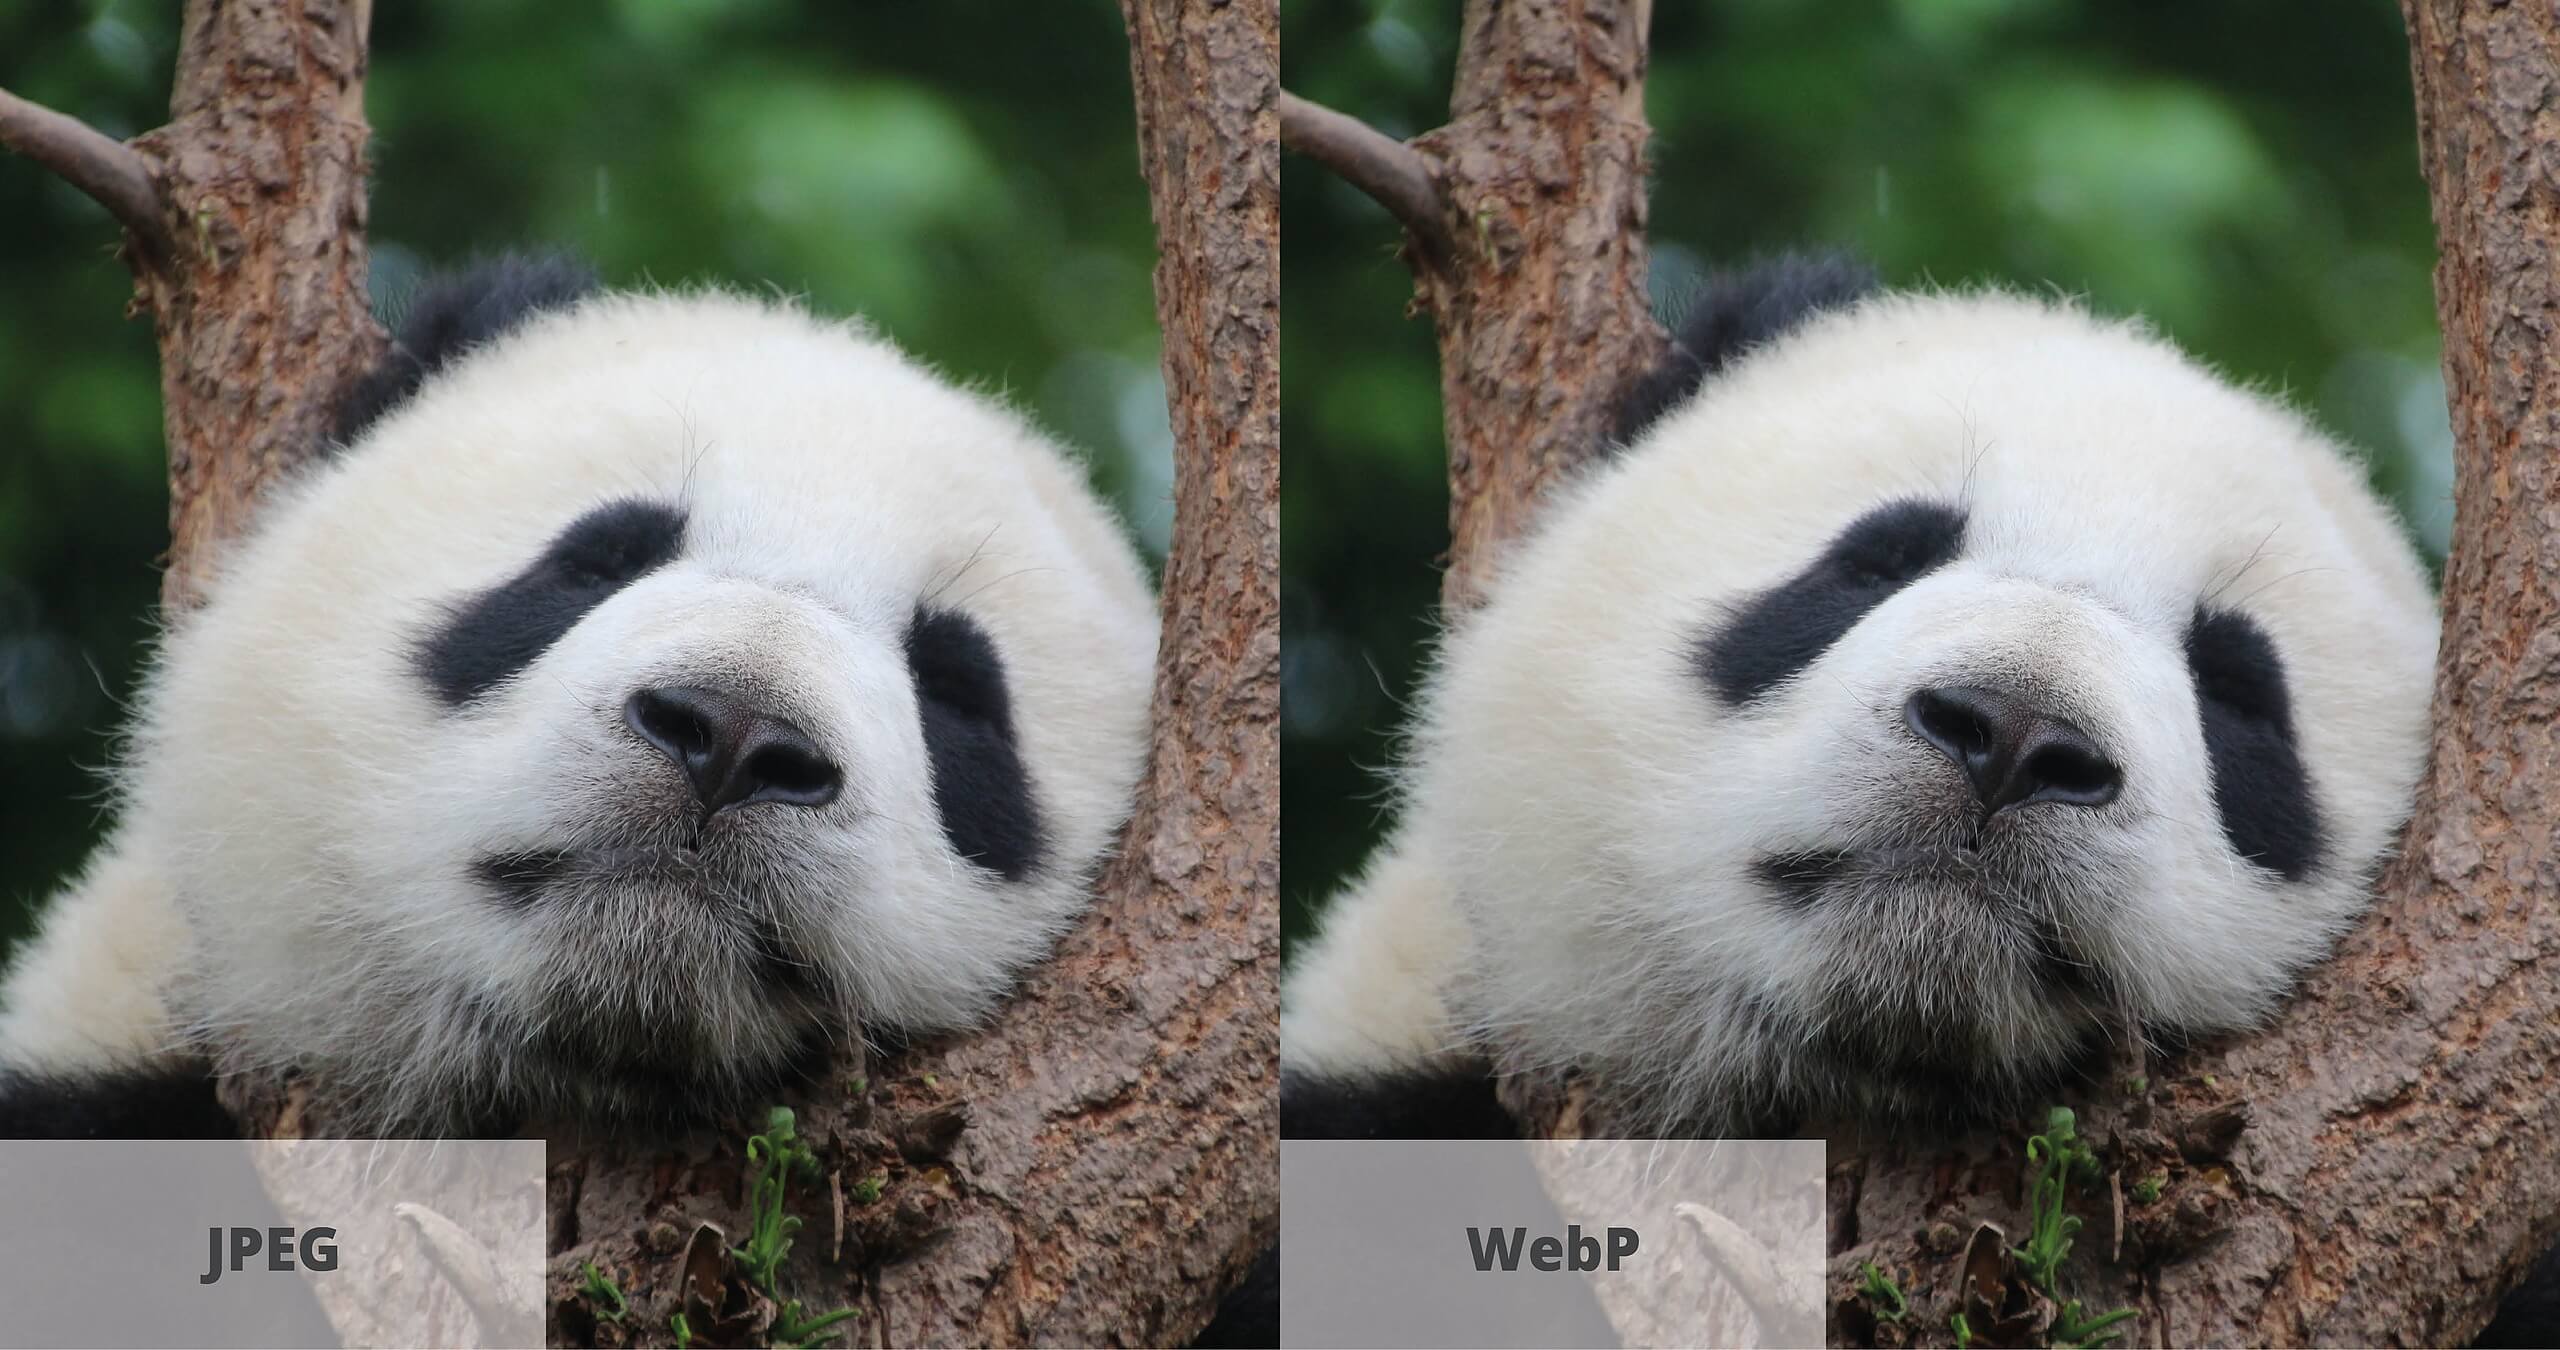 WebP images: why should you use them to improve your website?